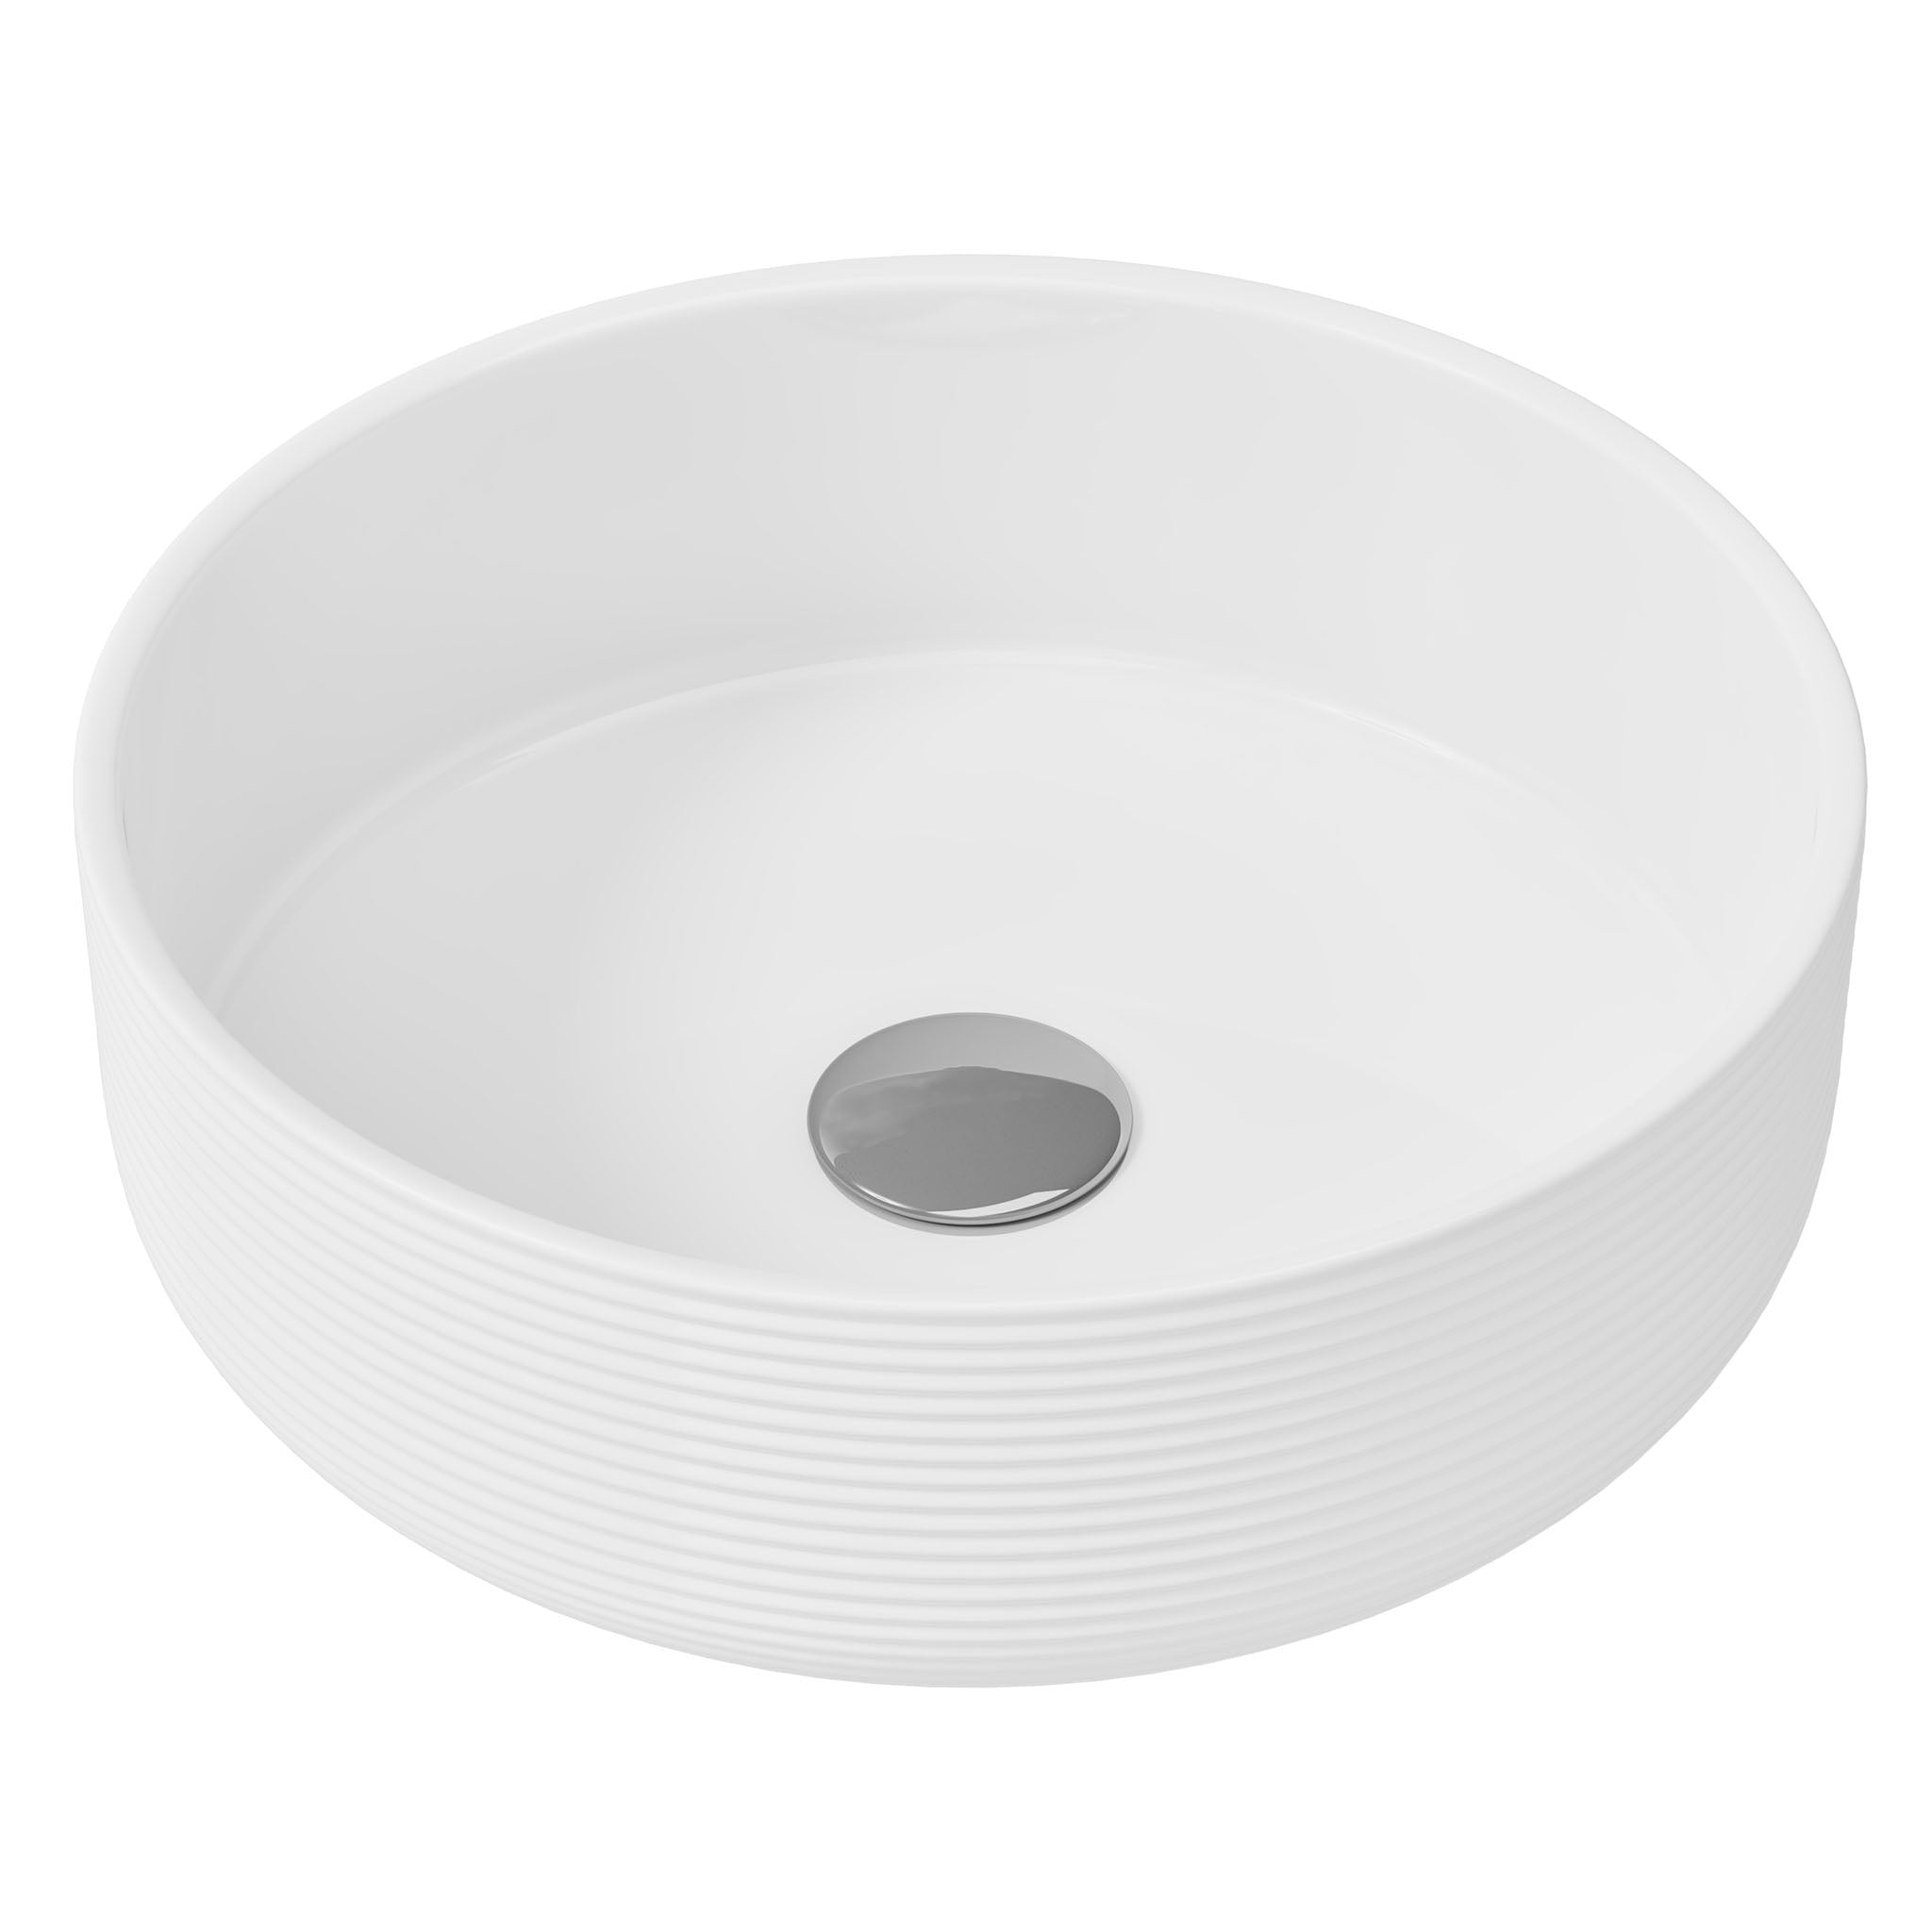 MyLife Lagos 360mm Freestanding Ceramic Basin With Striped Texture